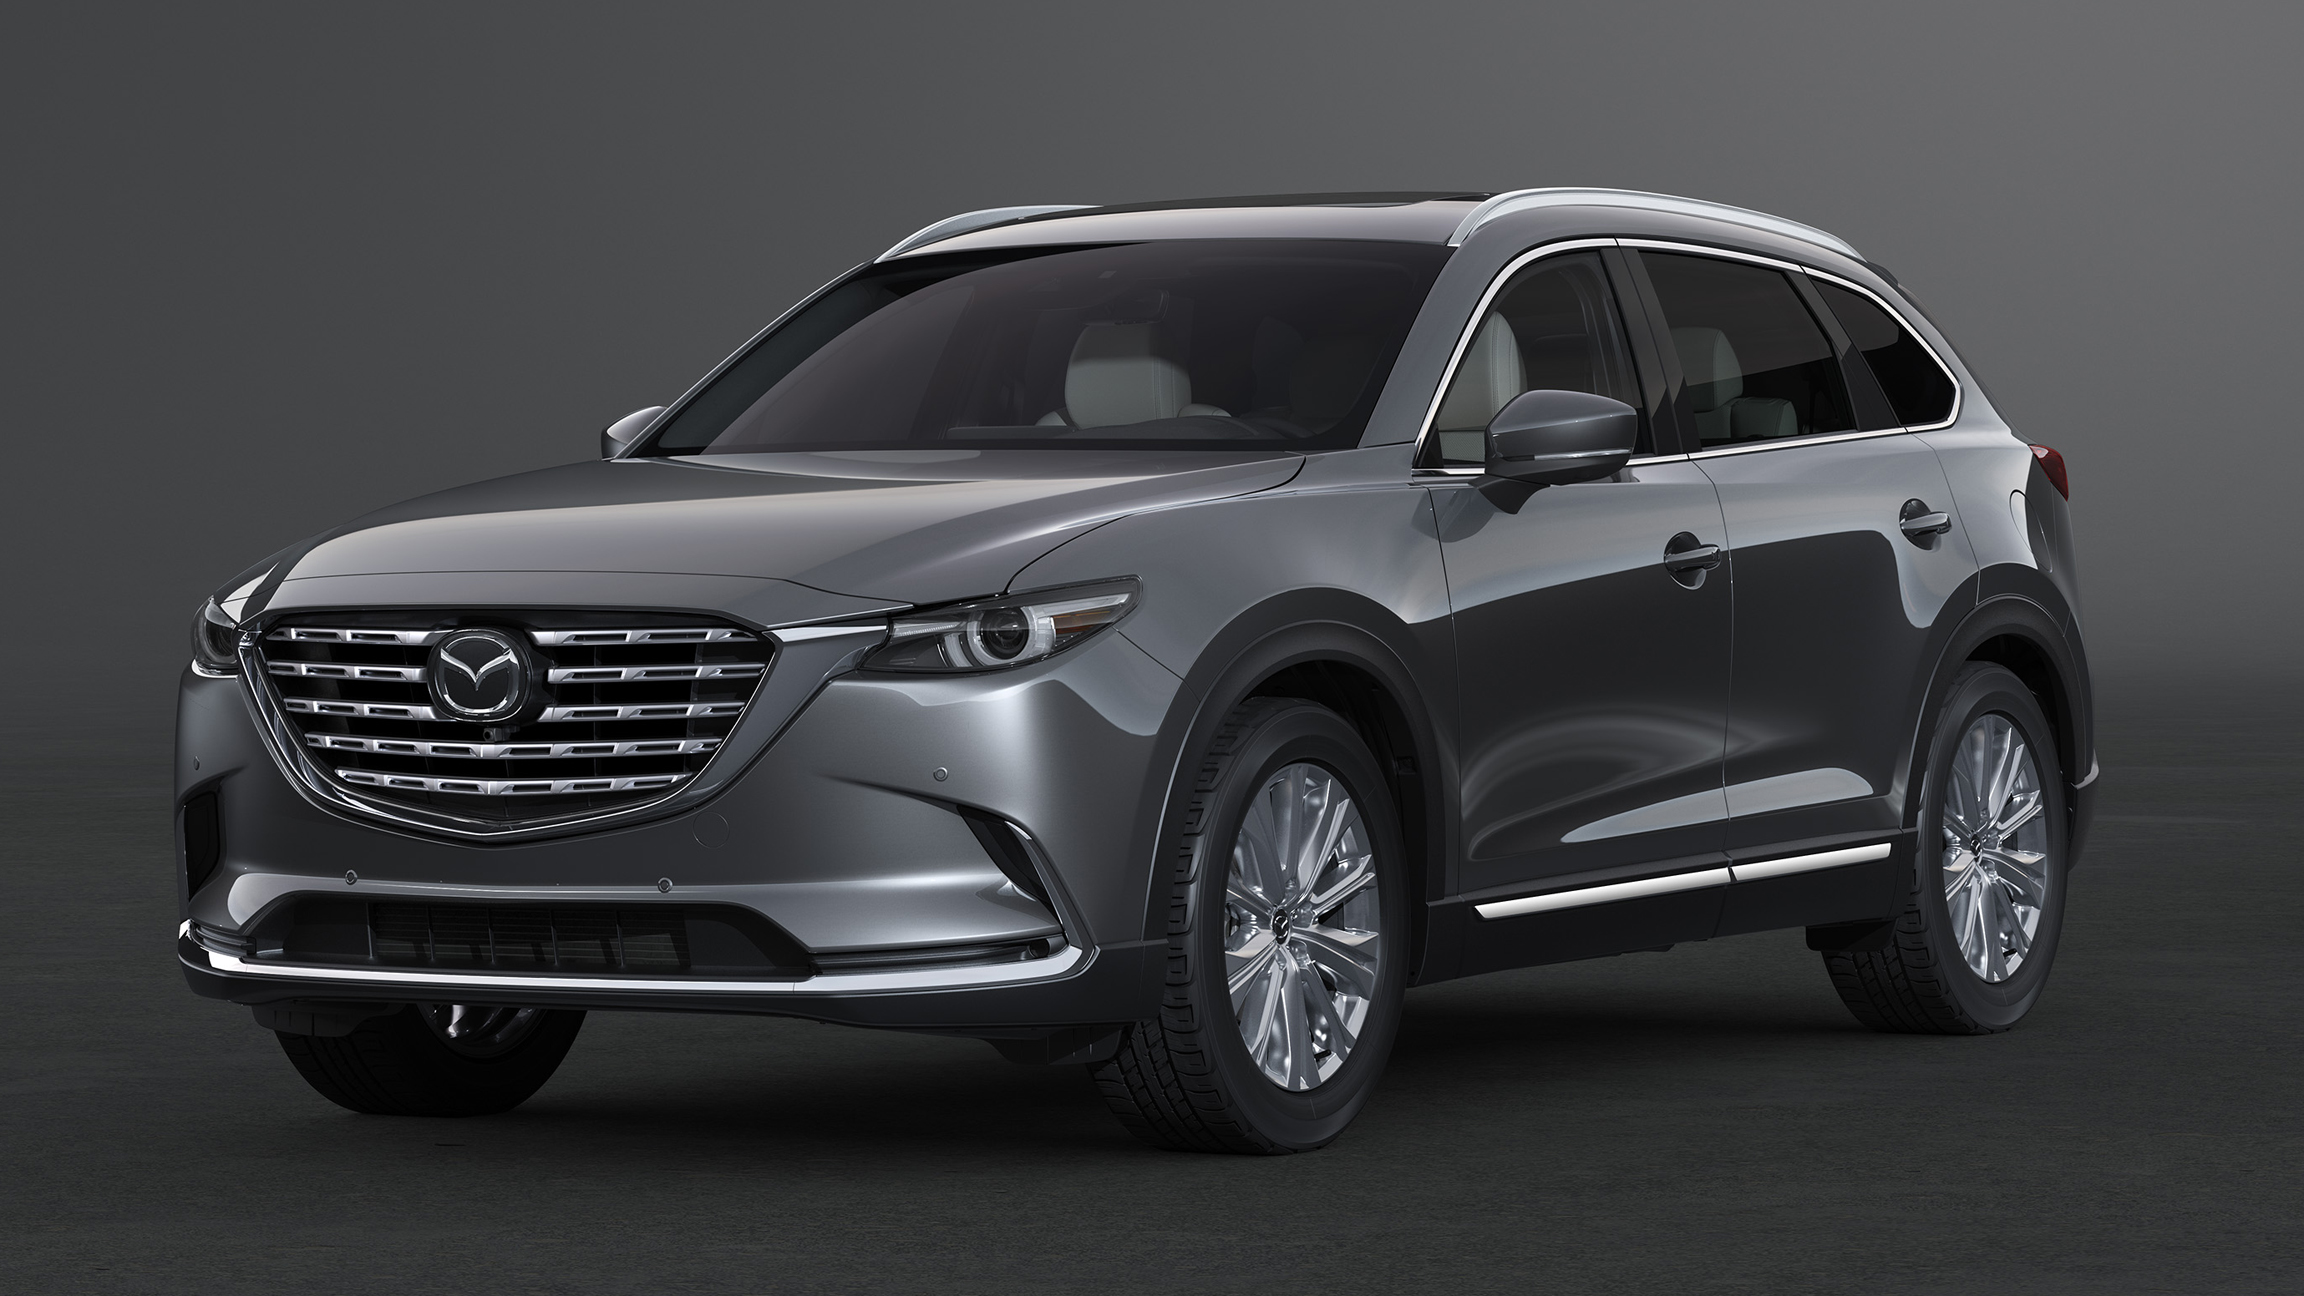 2021 Mazda Cx 9 Review Pricing Specs Features Fuel Economy And